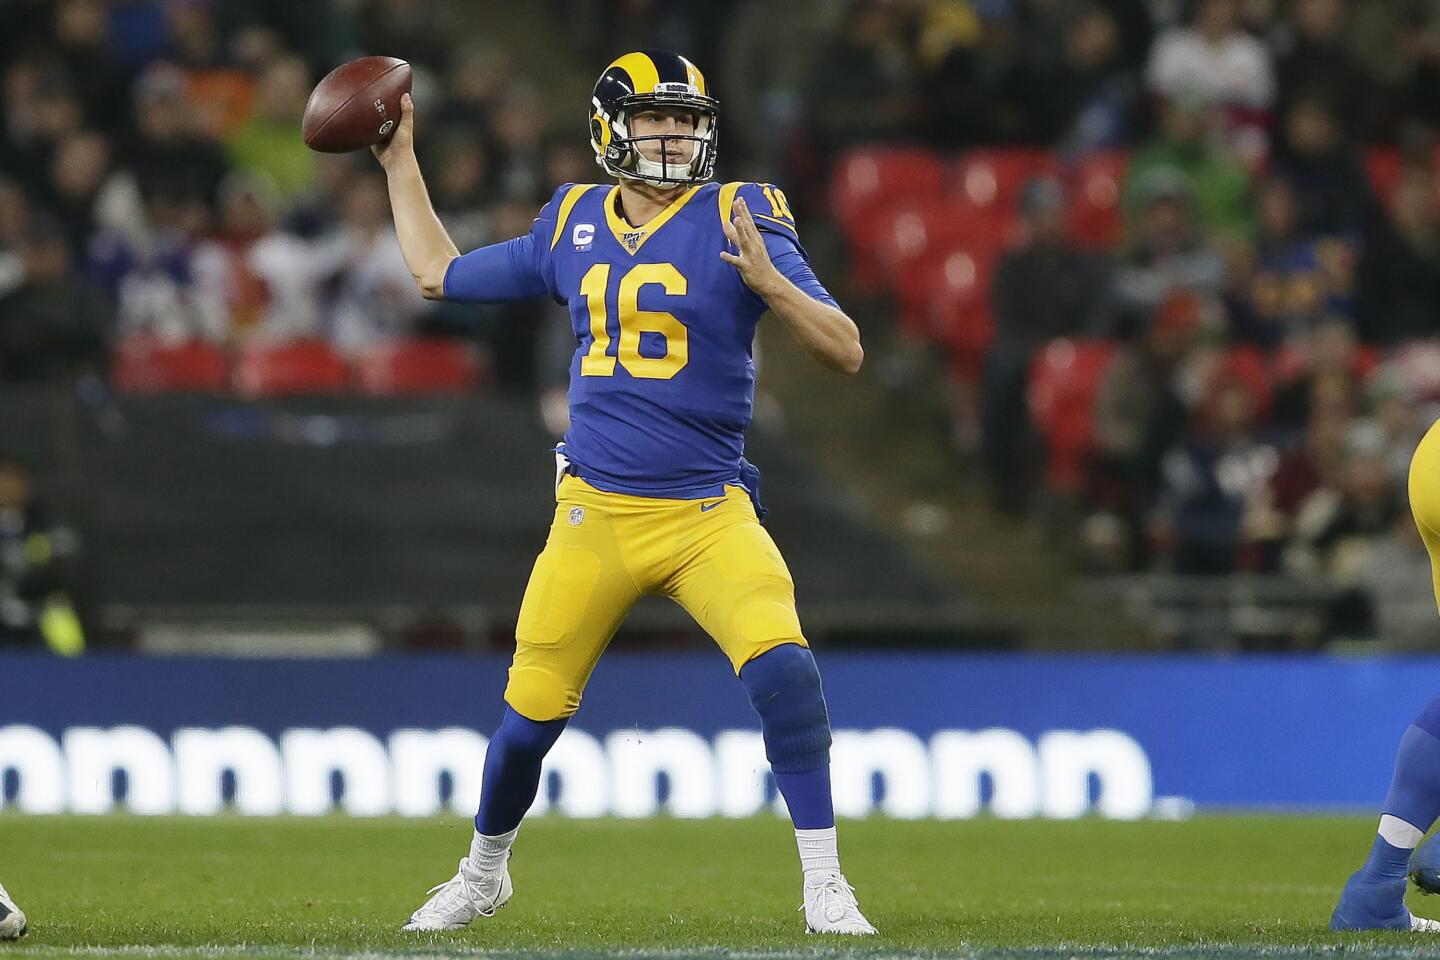 Rams quarterback Jared Goff makes a pass against the Bengals during the second half